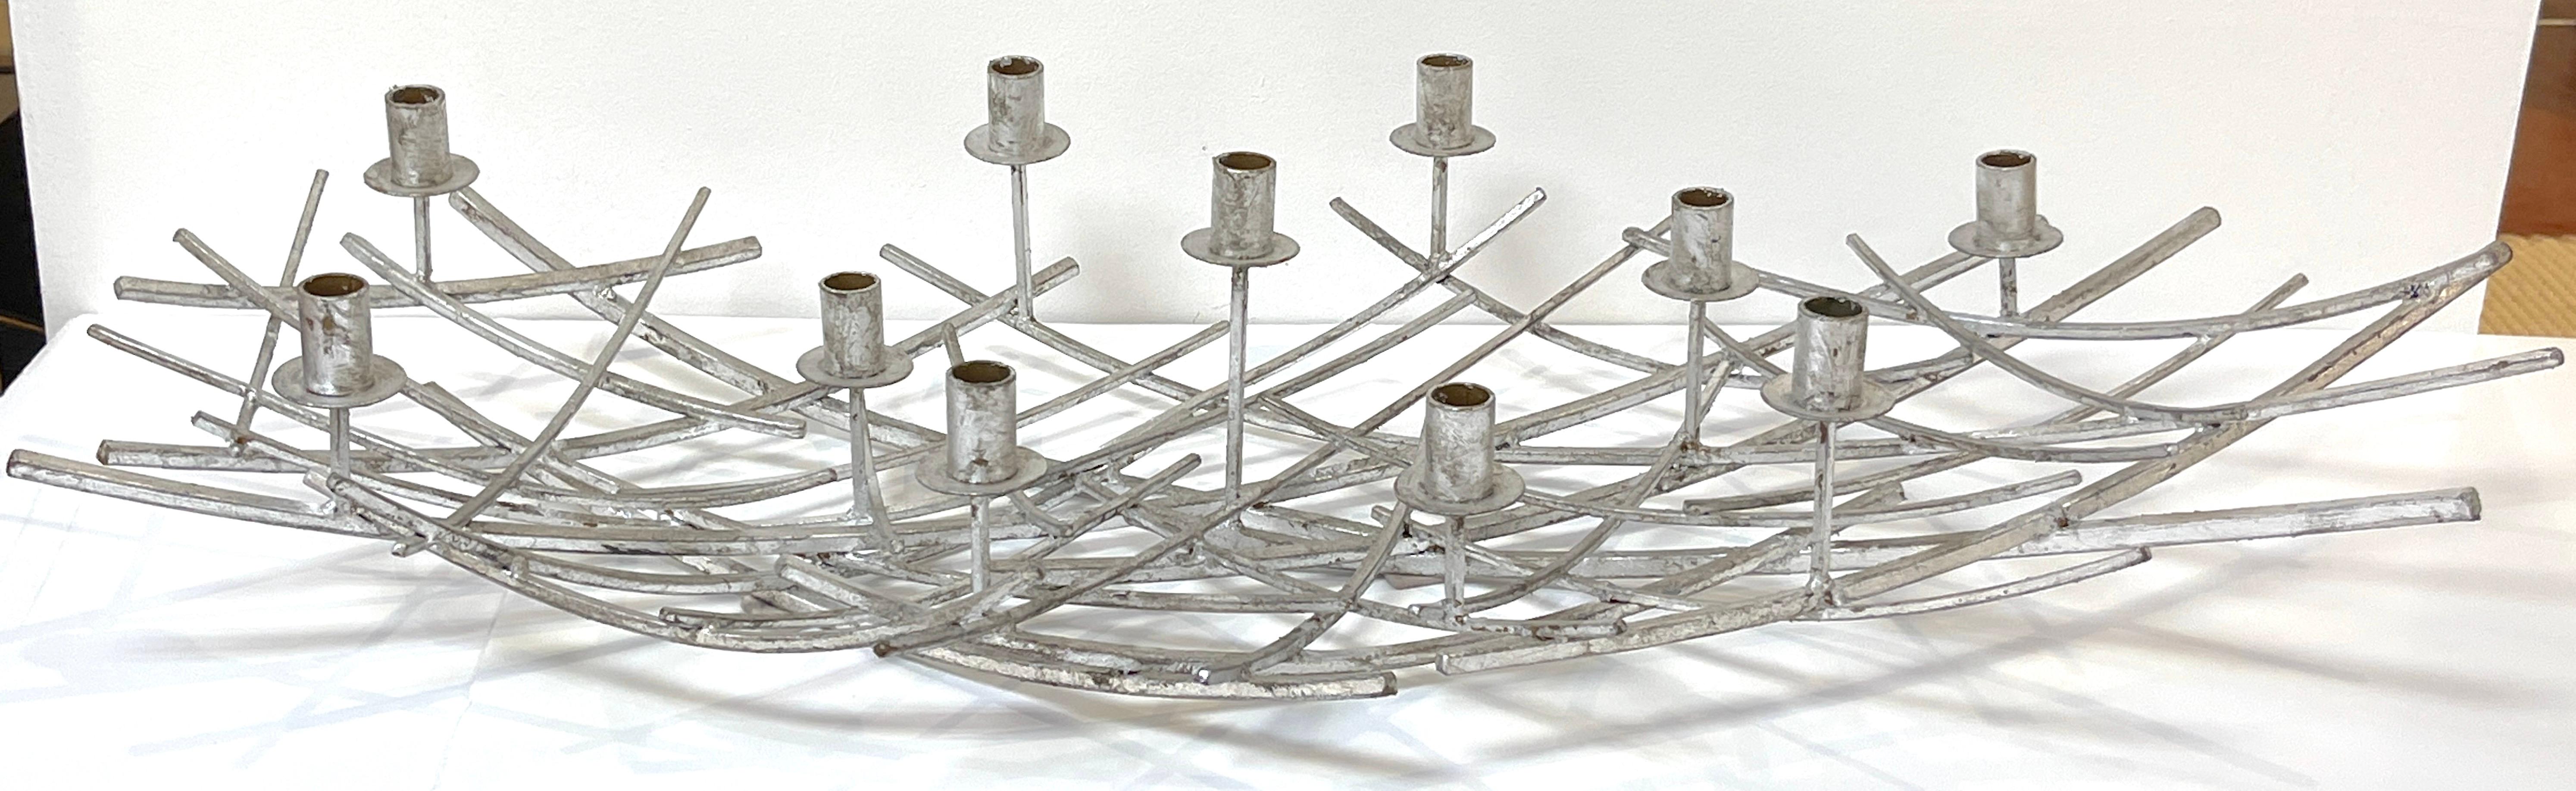 20th Century 12 Light French Modern Kinetic Silvered Metal Candelabra Centerpiece   For Sale